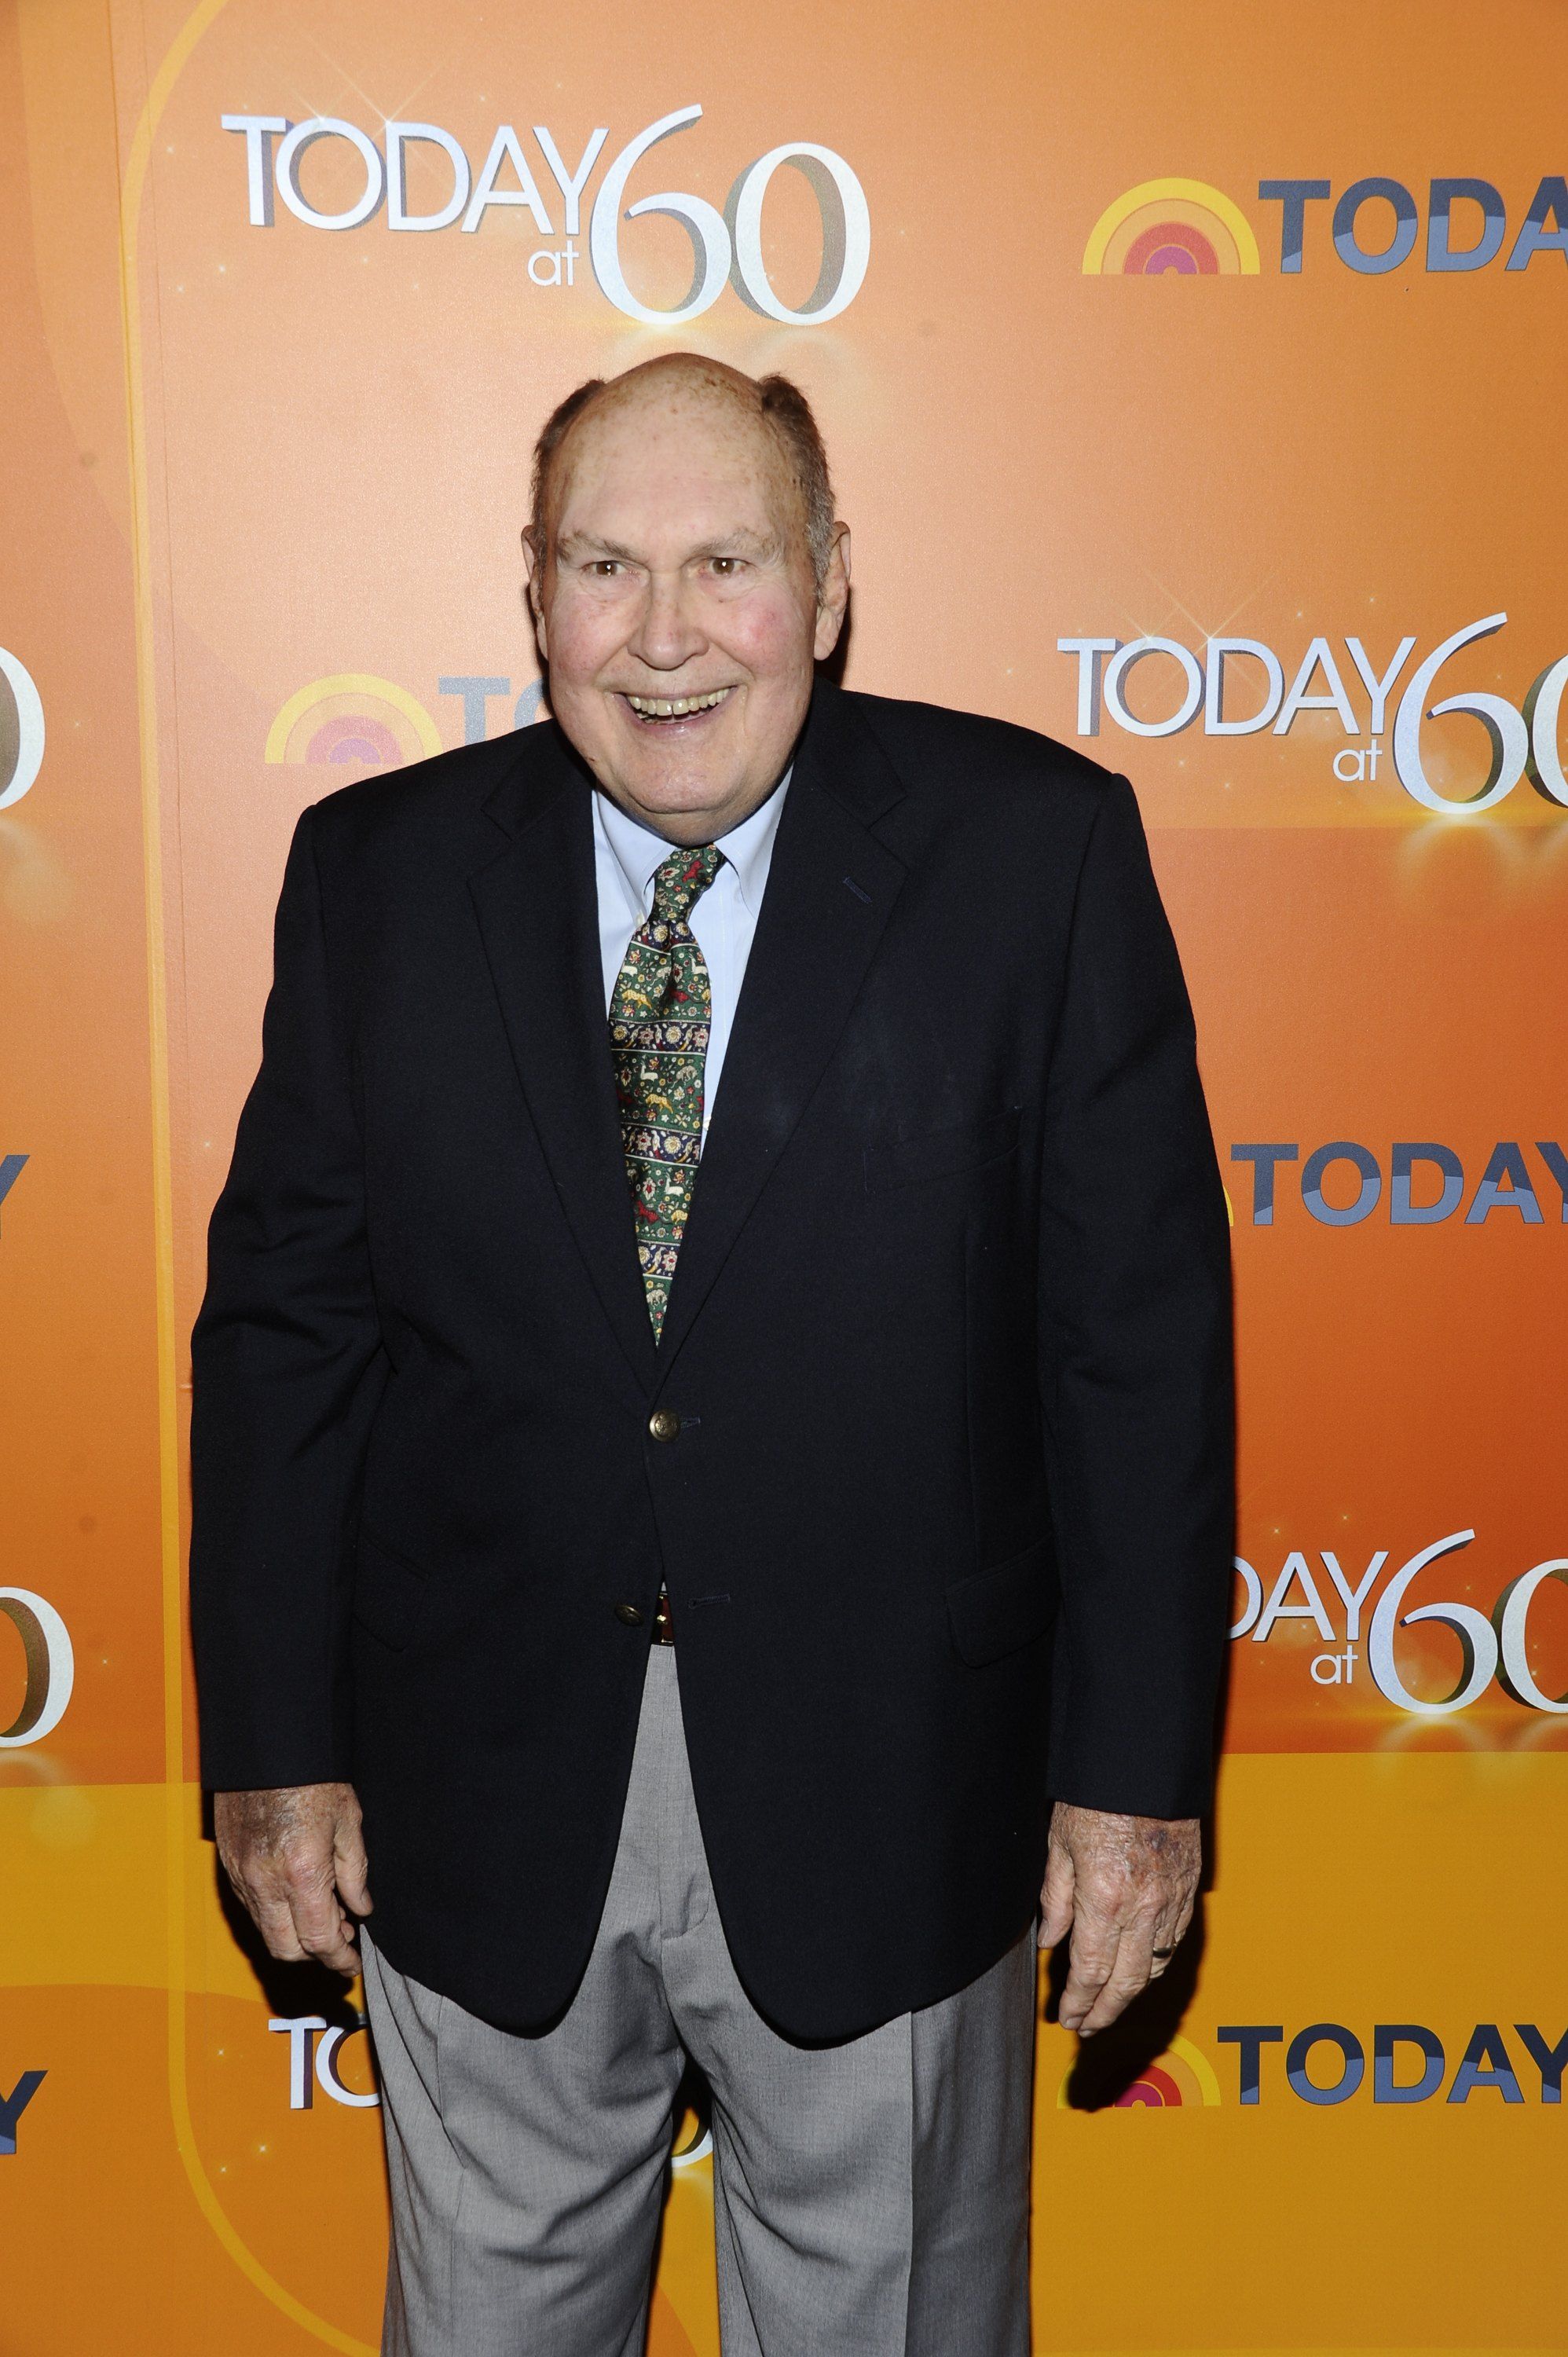 Willard Scott at the Edison Ballroom in New York to celebrate the 60th anniversary of the "TODAY" show on January 12, 2012. | Source: Getty Images